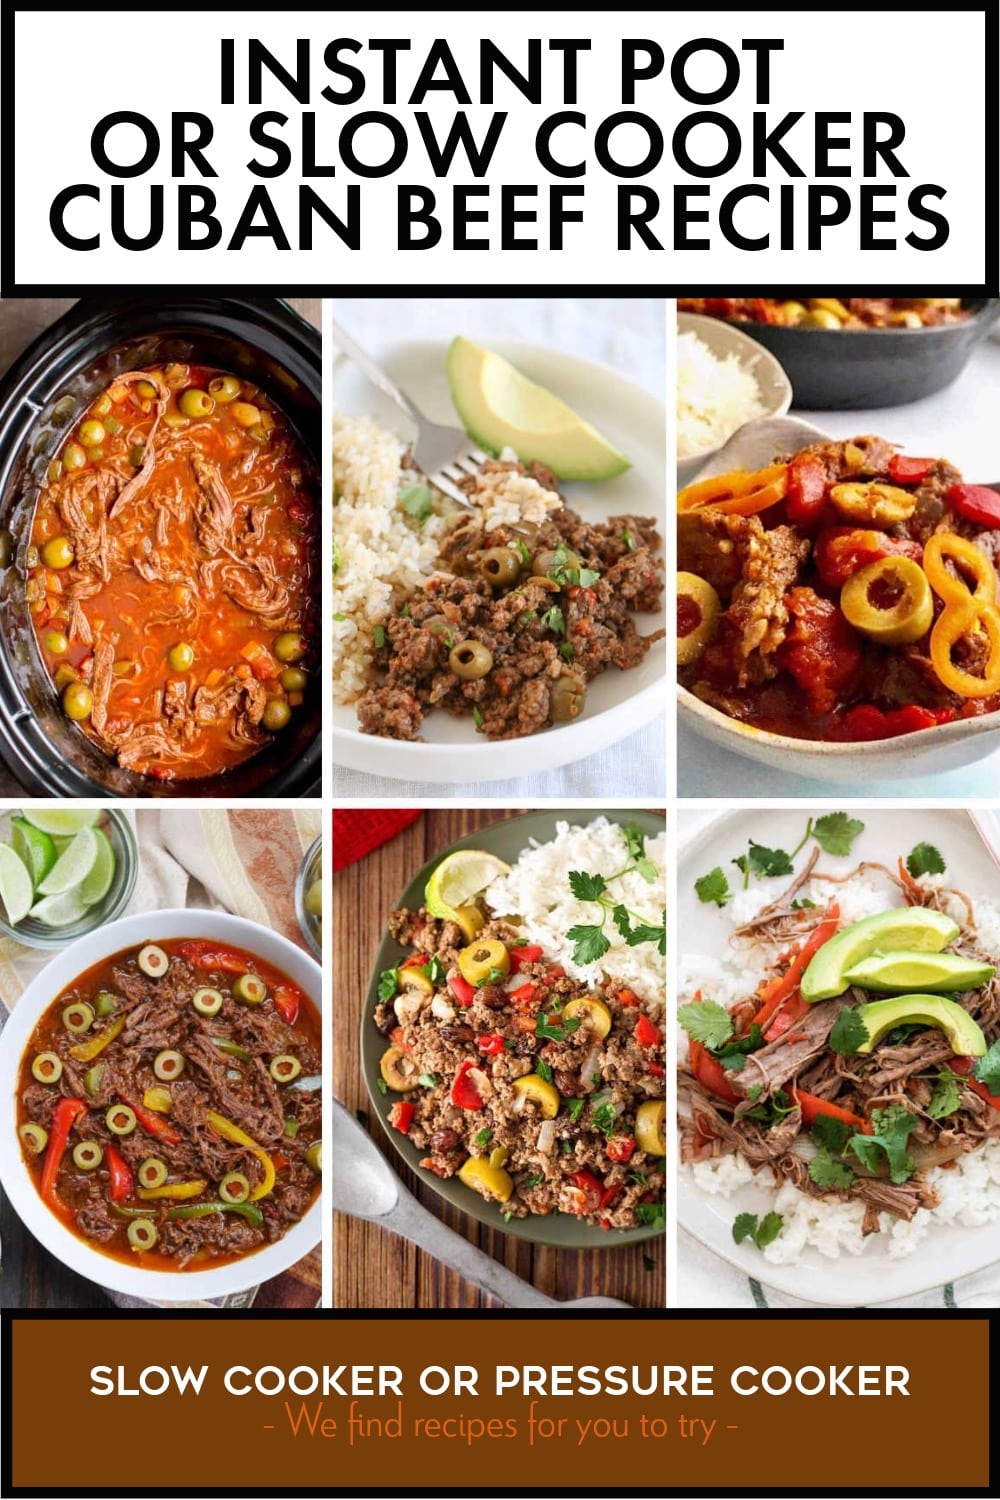 Pinterest image of Instant Pot or Slow Cooker Cuban Beef Recipes